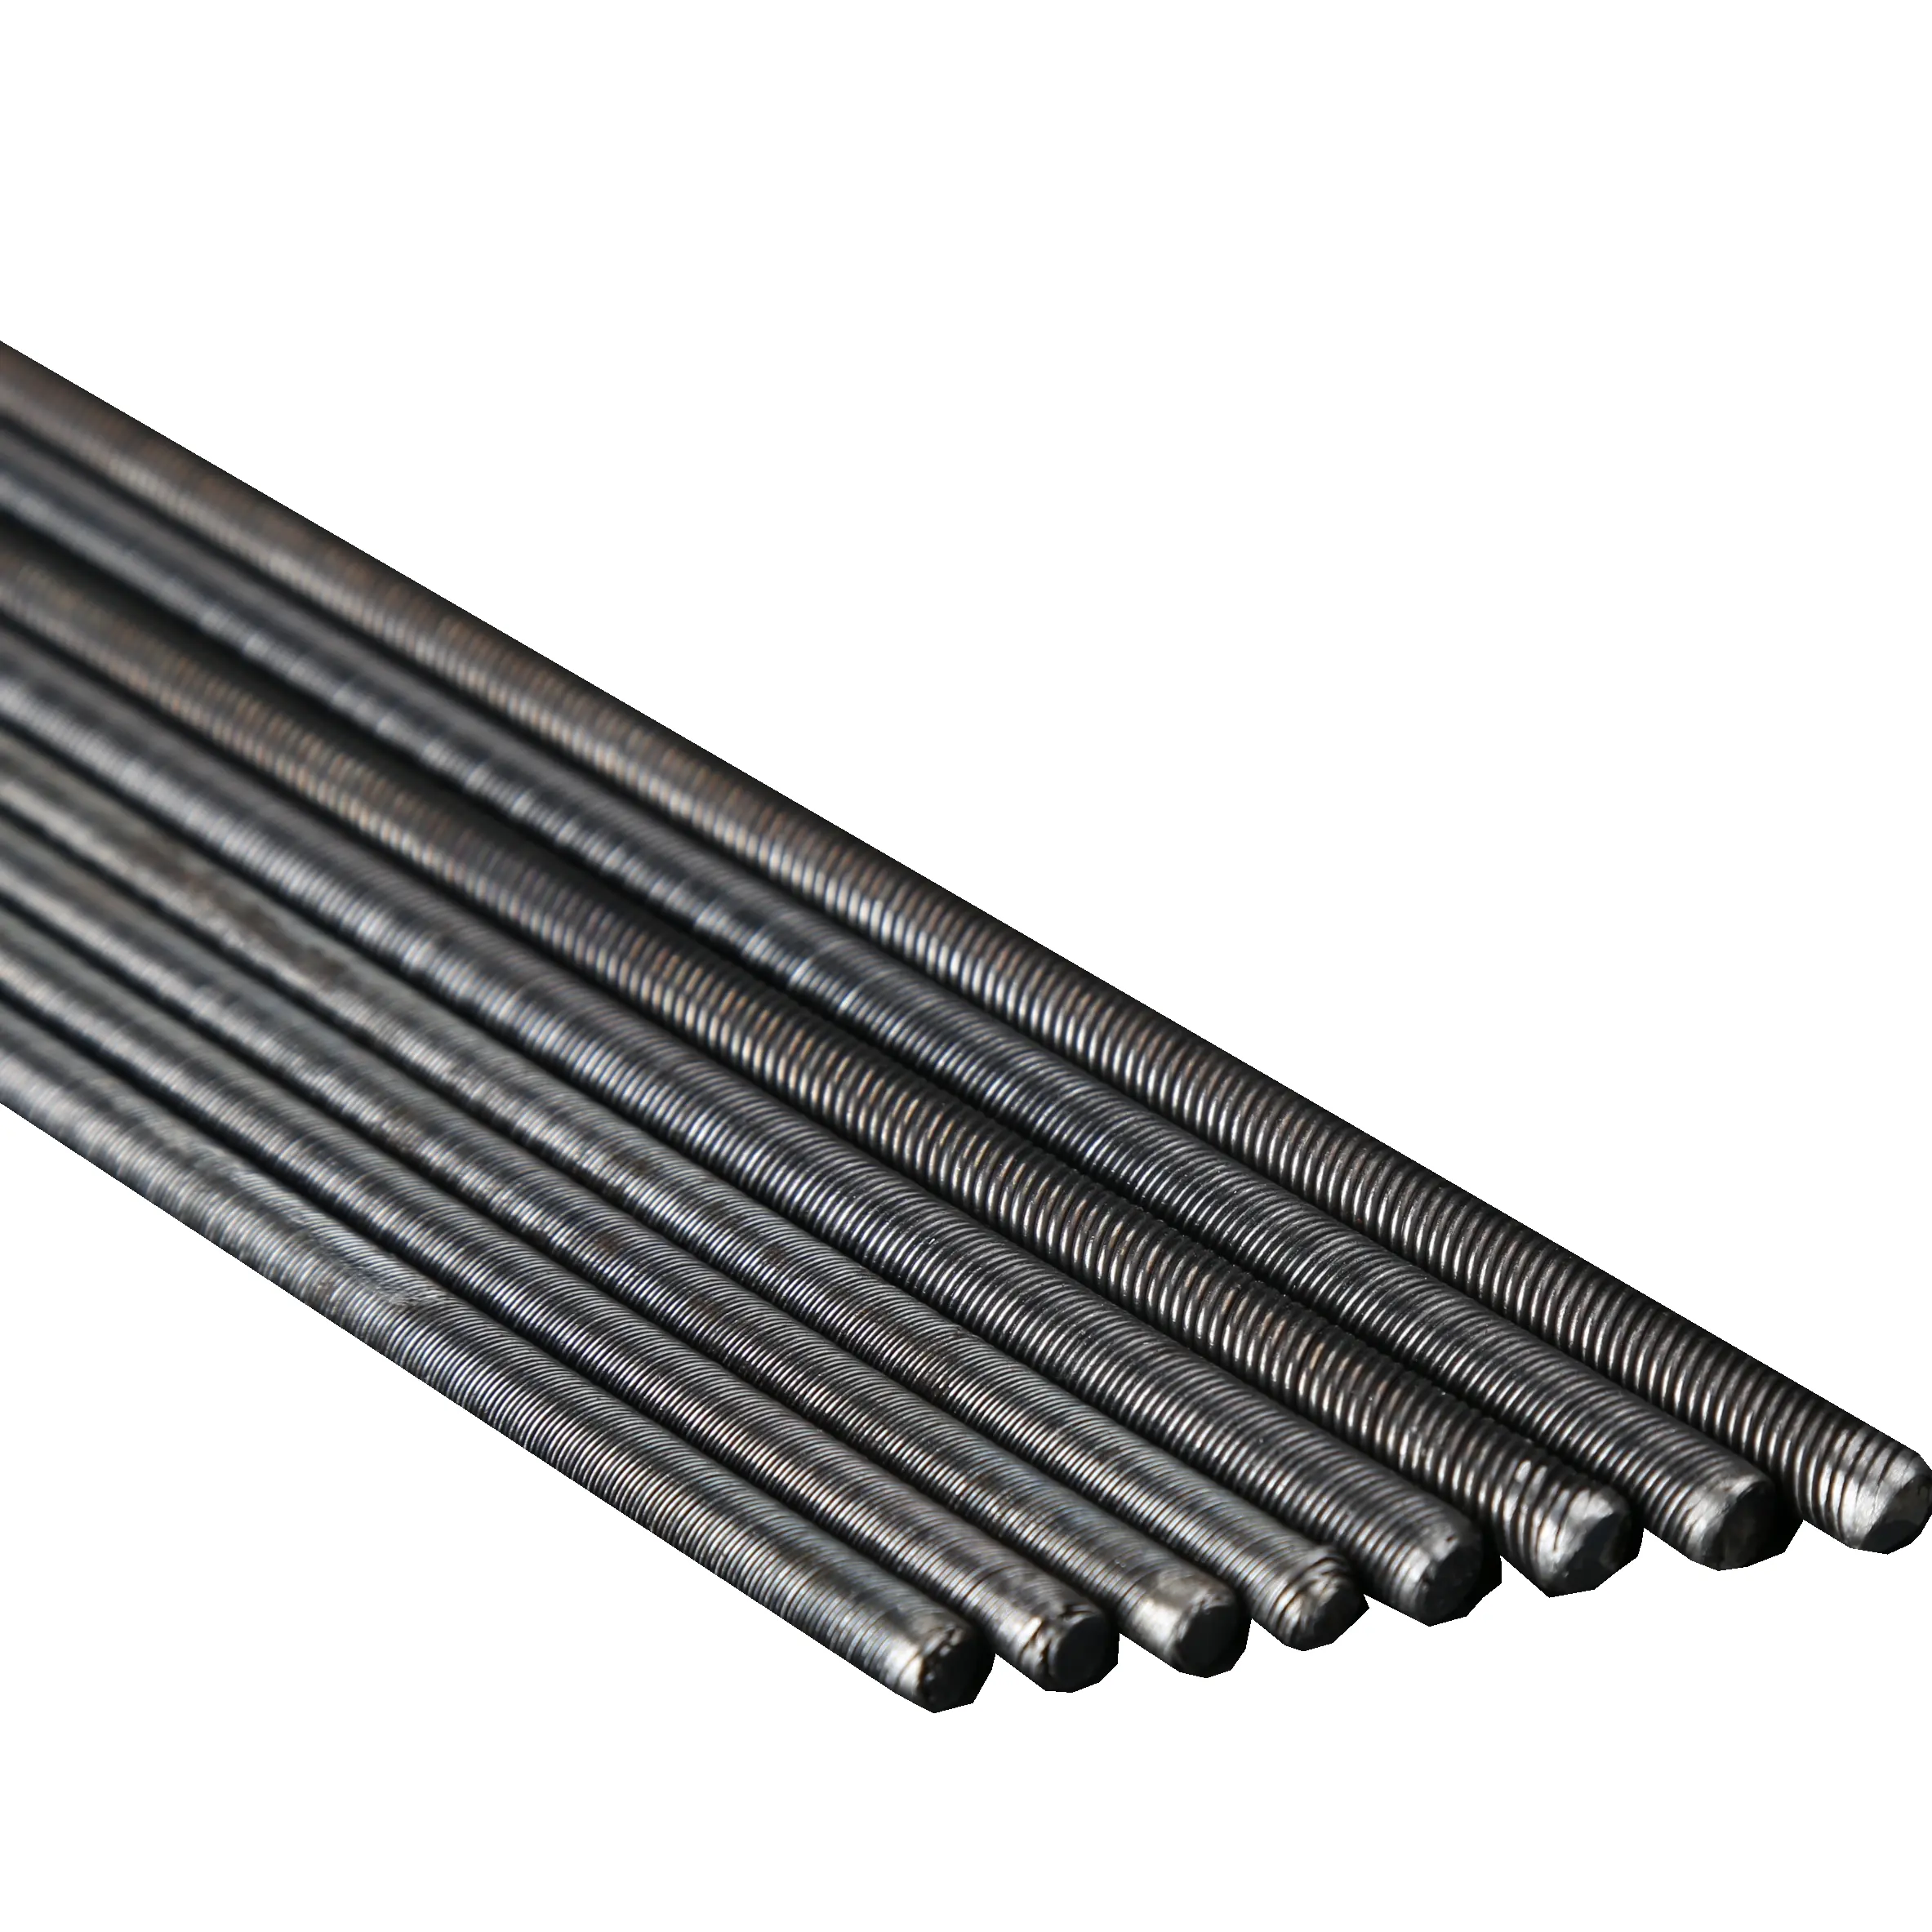 Large diameter left rotation 65Mn material steel wire drive shaft